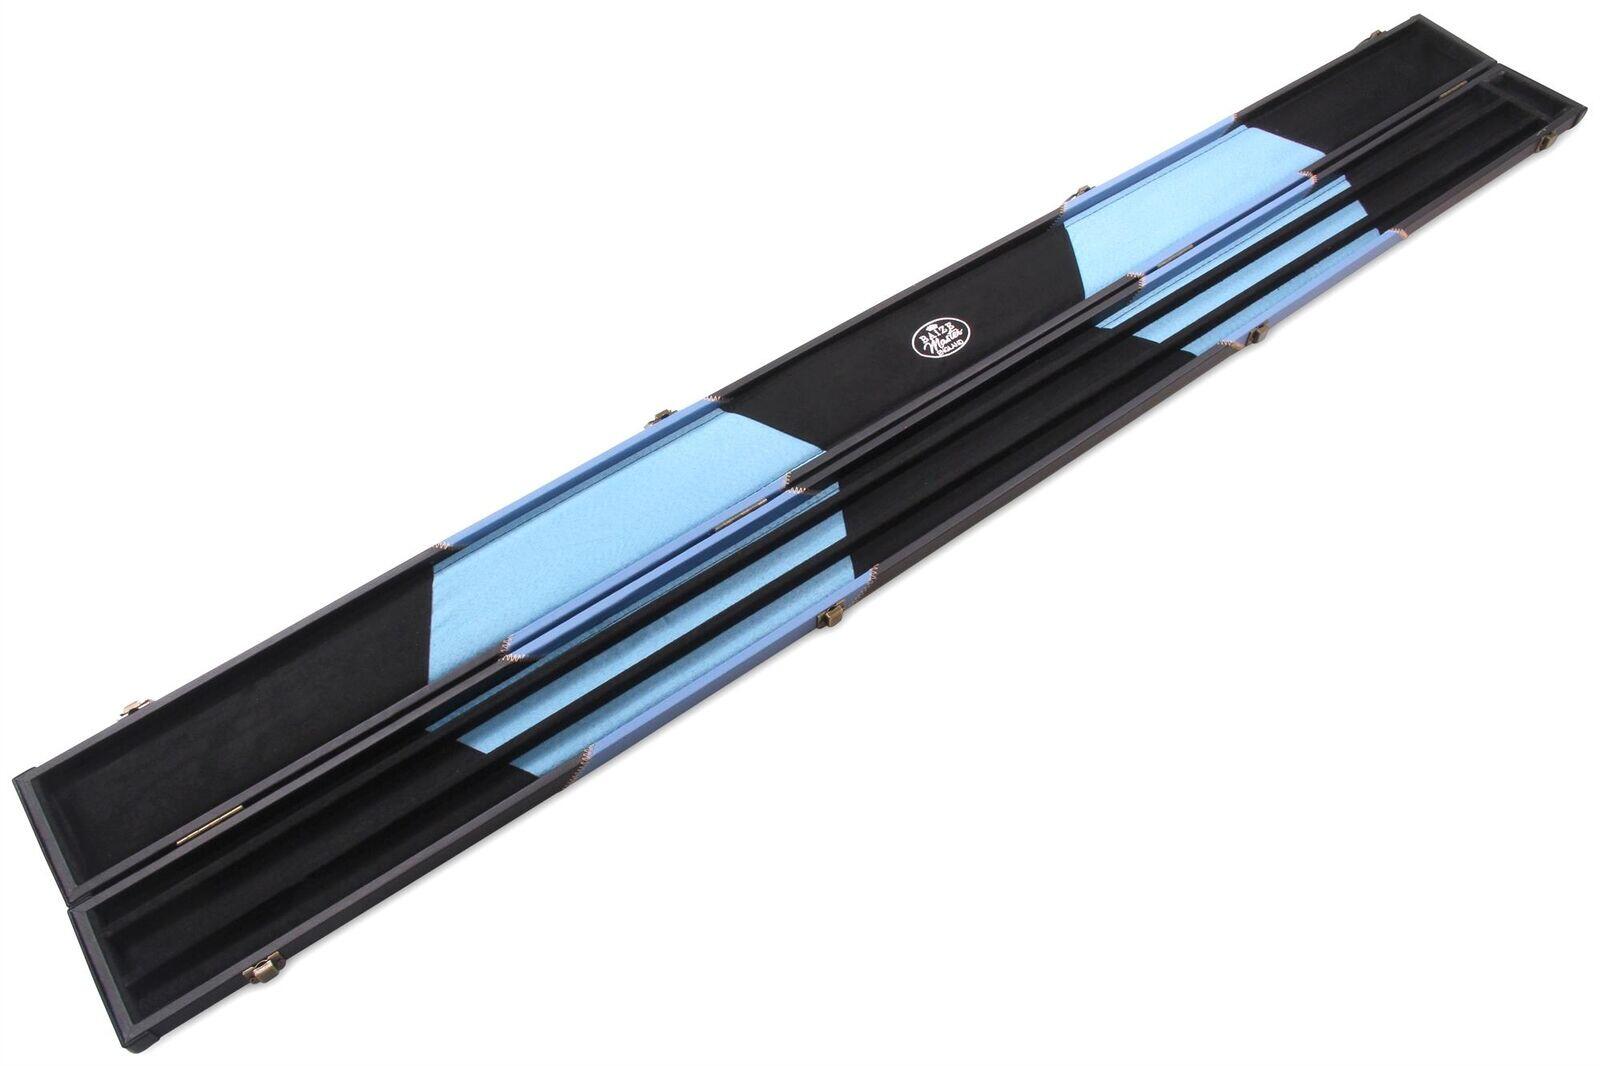 Baize Master 1 Piece WIDE SKY BLUE ARROW Snooker Pool Cue Case - Holds 3 Cues 3/7